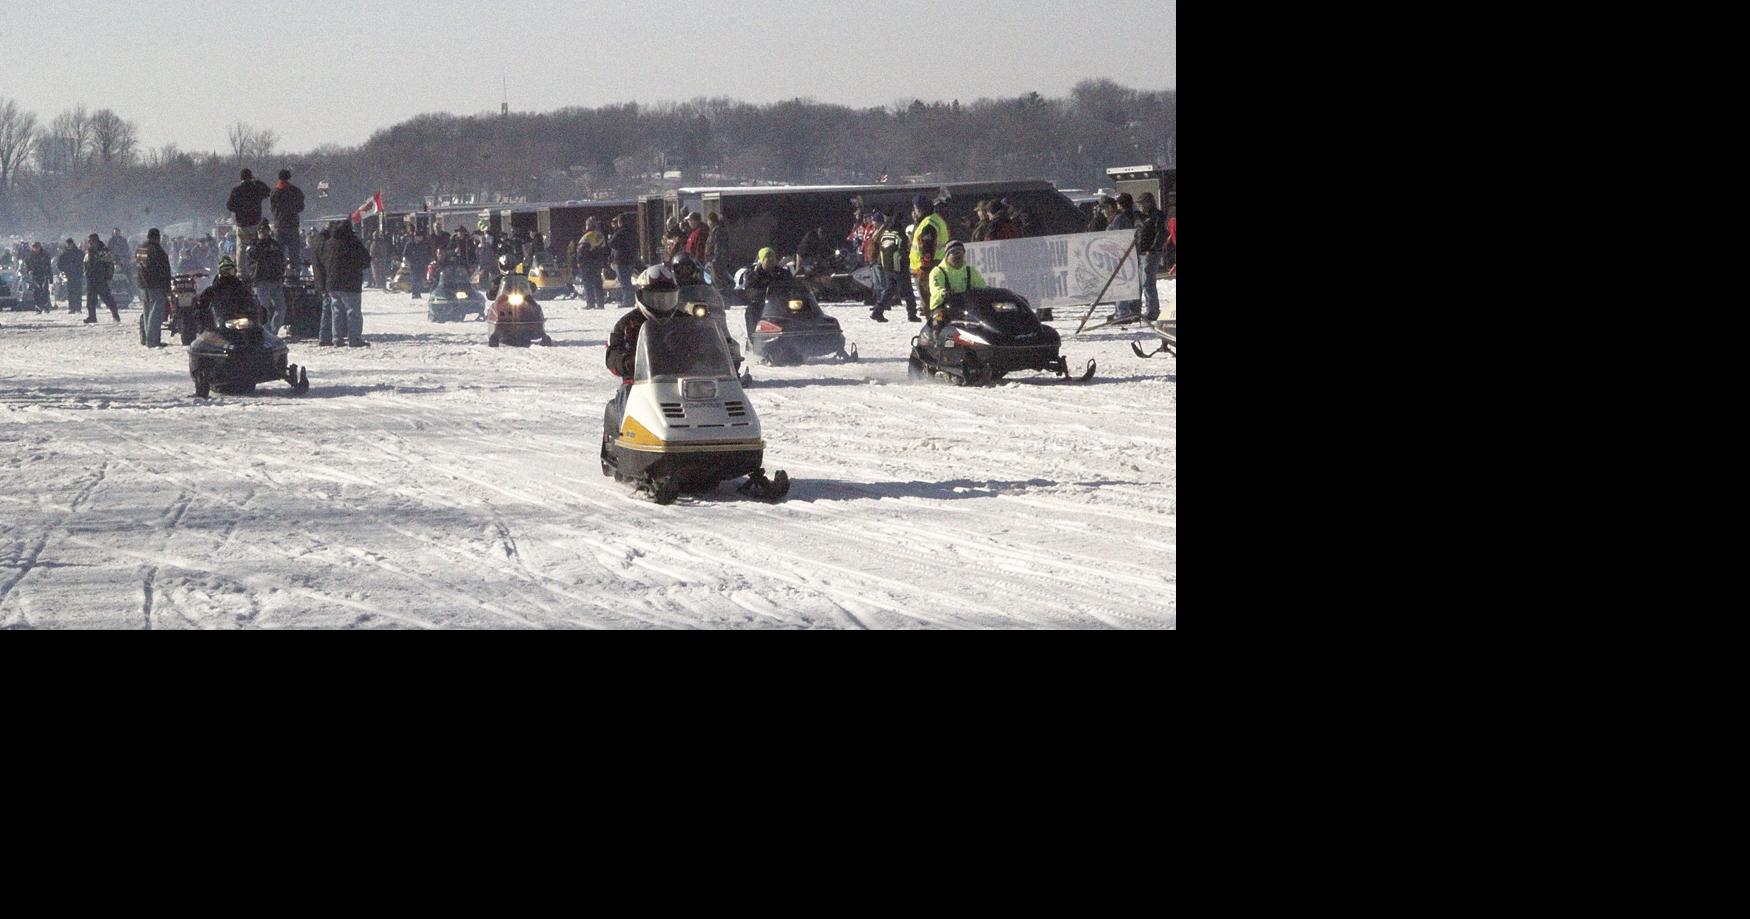 Future of vintage snowmobile show on Lake Waconia uncertain after rate